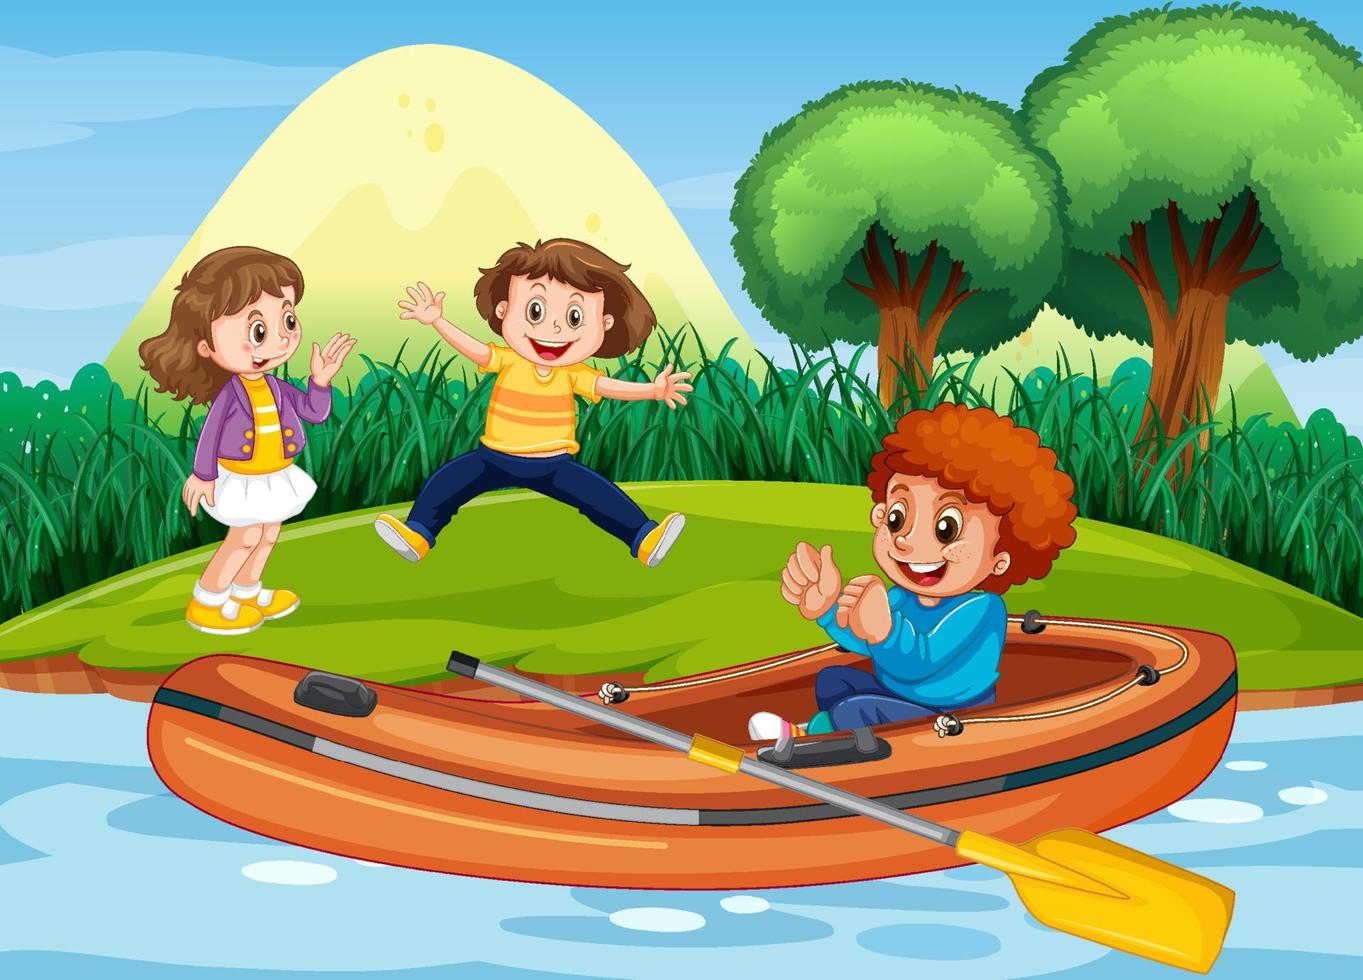 Nature scenery with children and inflatable boat vector